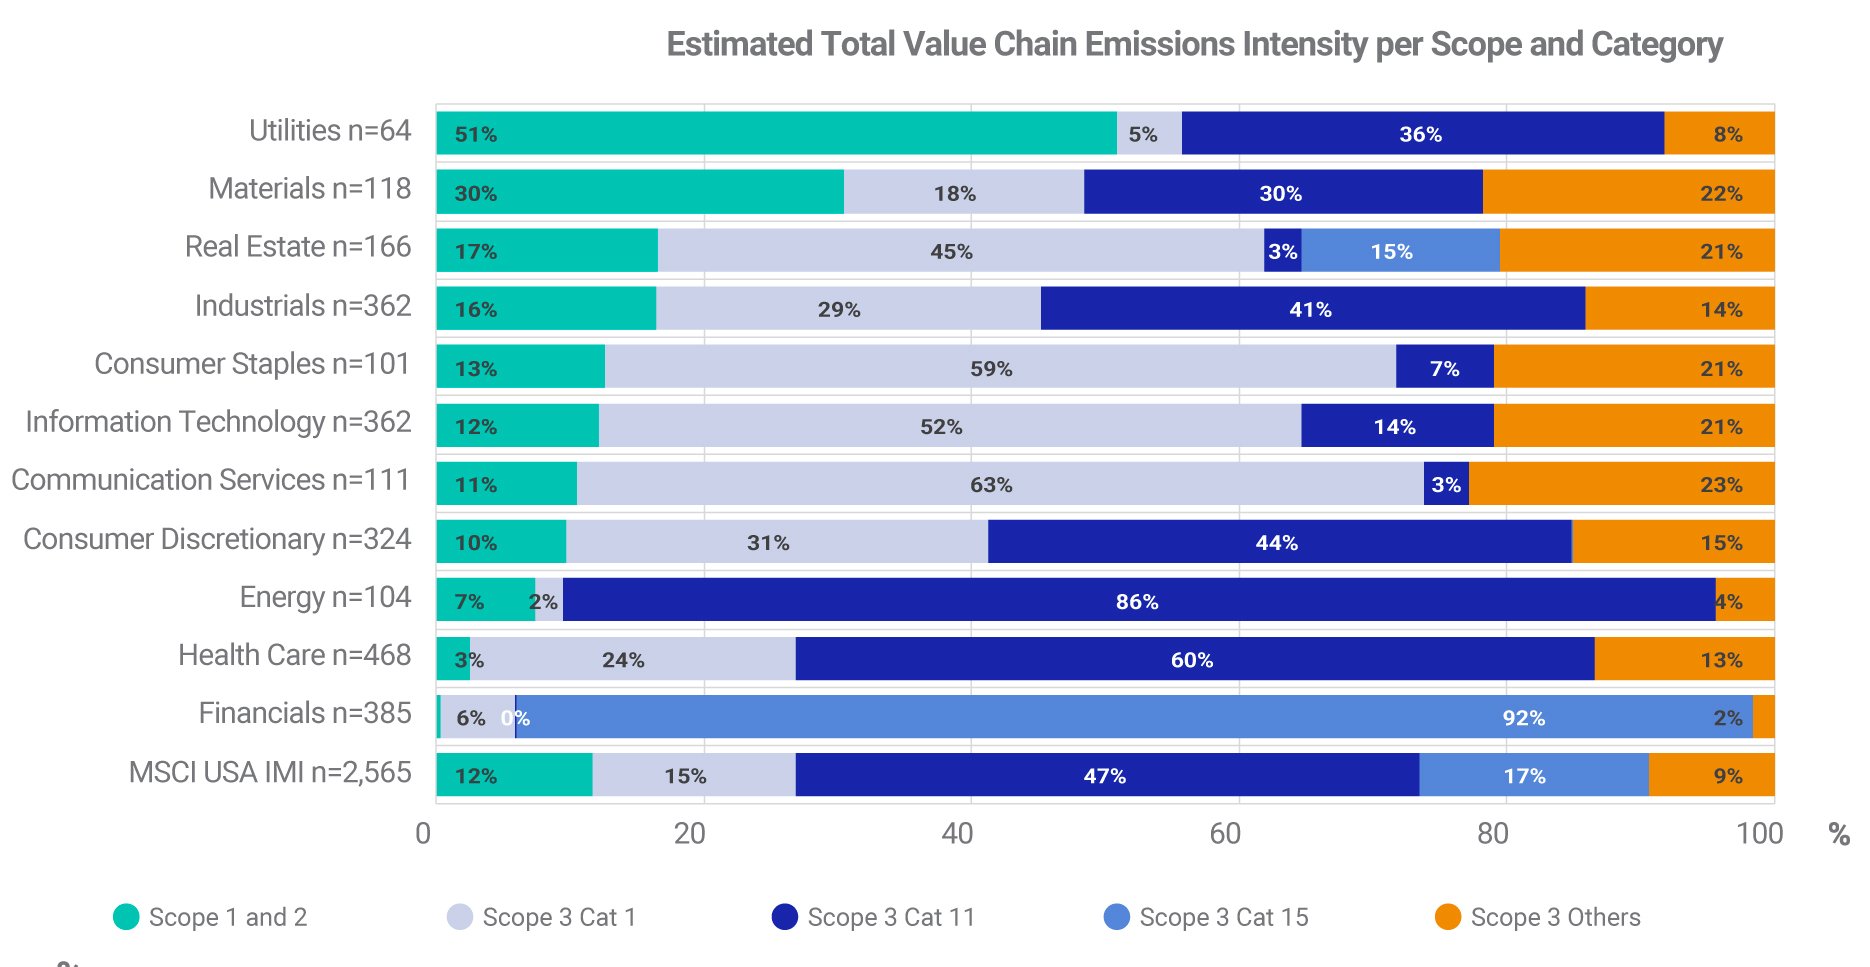 Chart showing the estimated total value chain emissions intensity per scope and category.